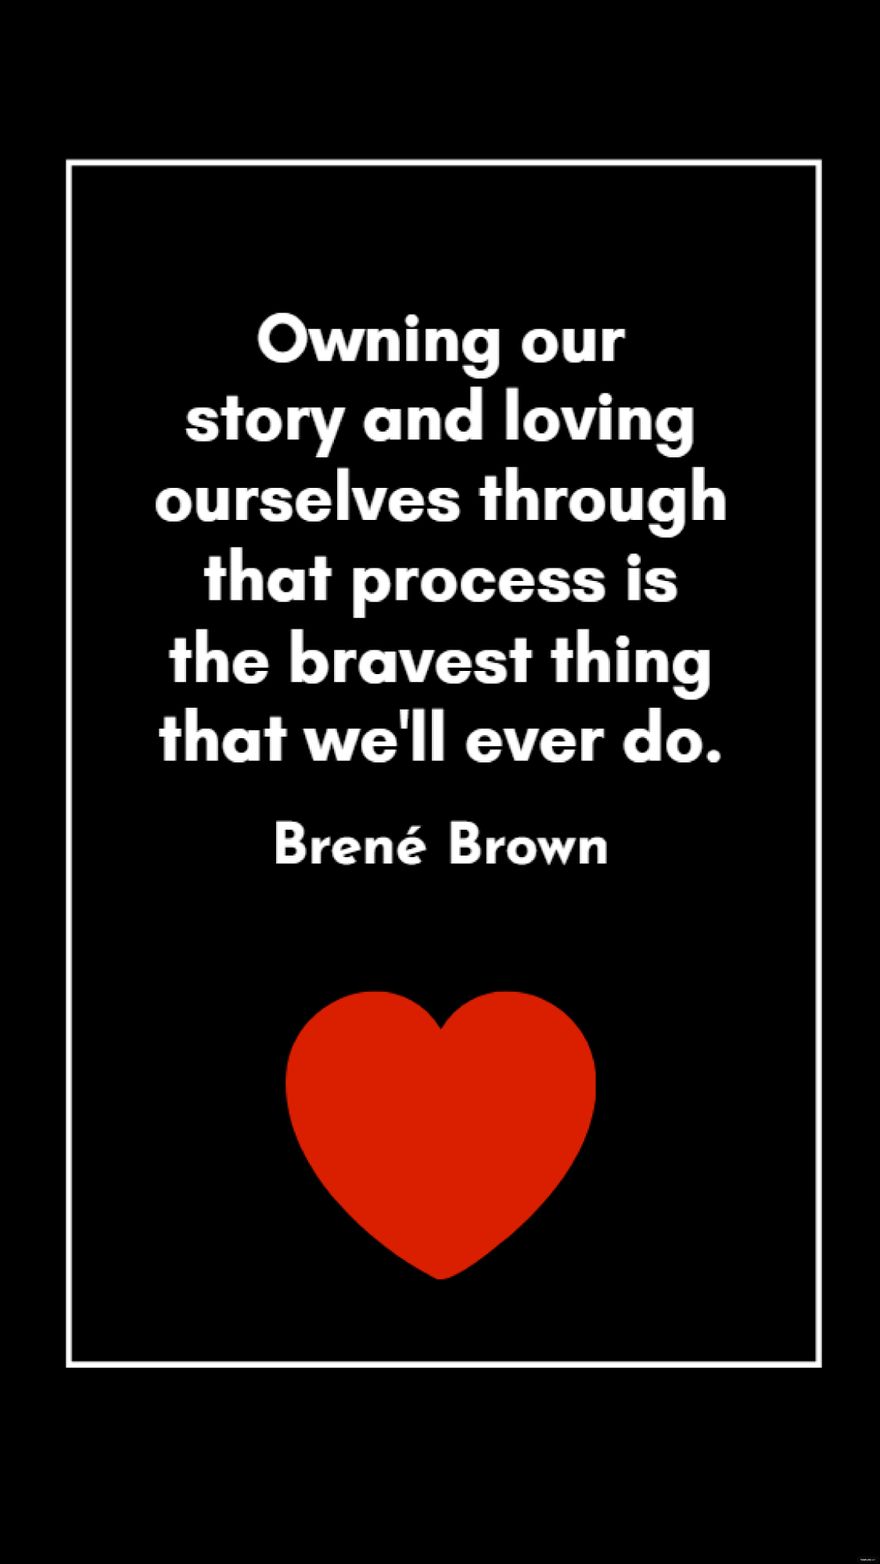 Free Brené Brown - Owning our story and loving ourselves through that process is the bravest thing that we'll ever do. in JPG